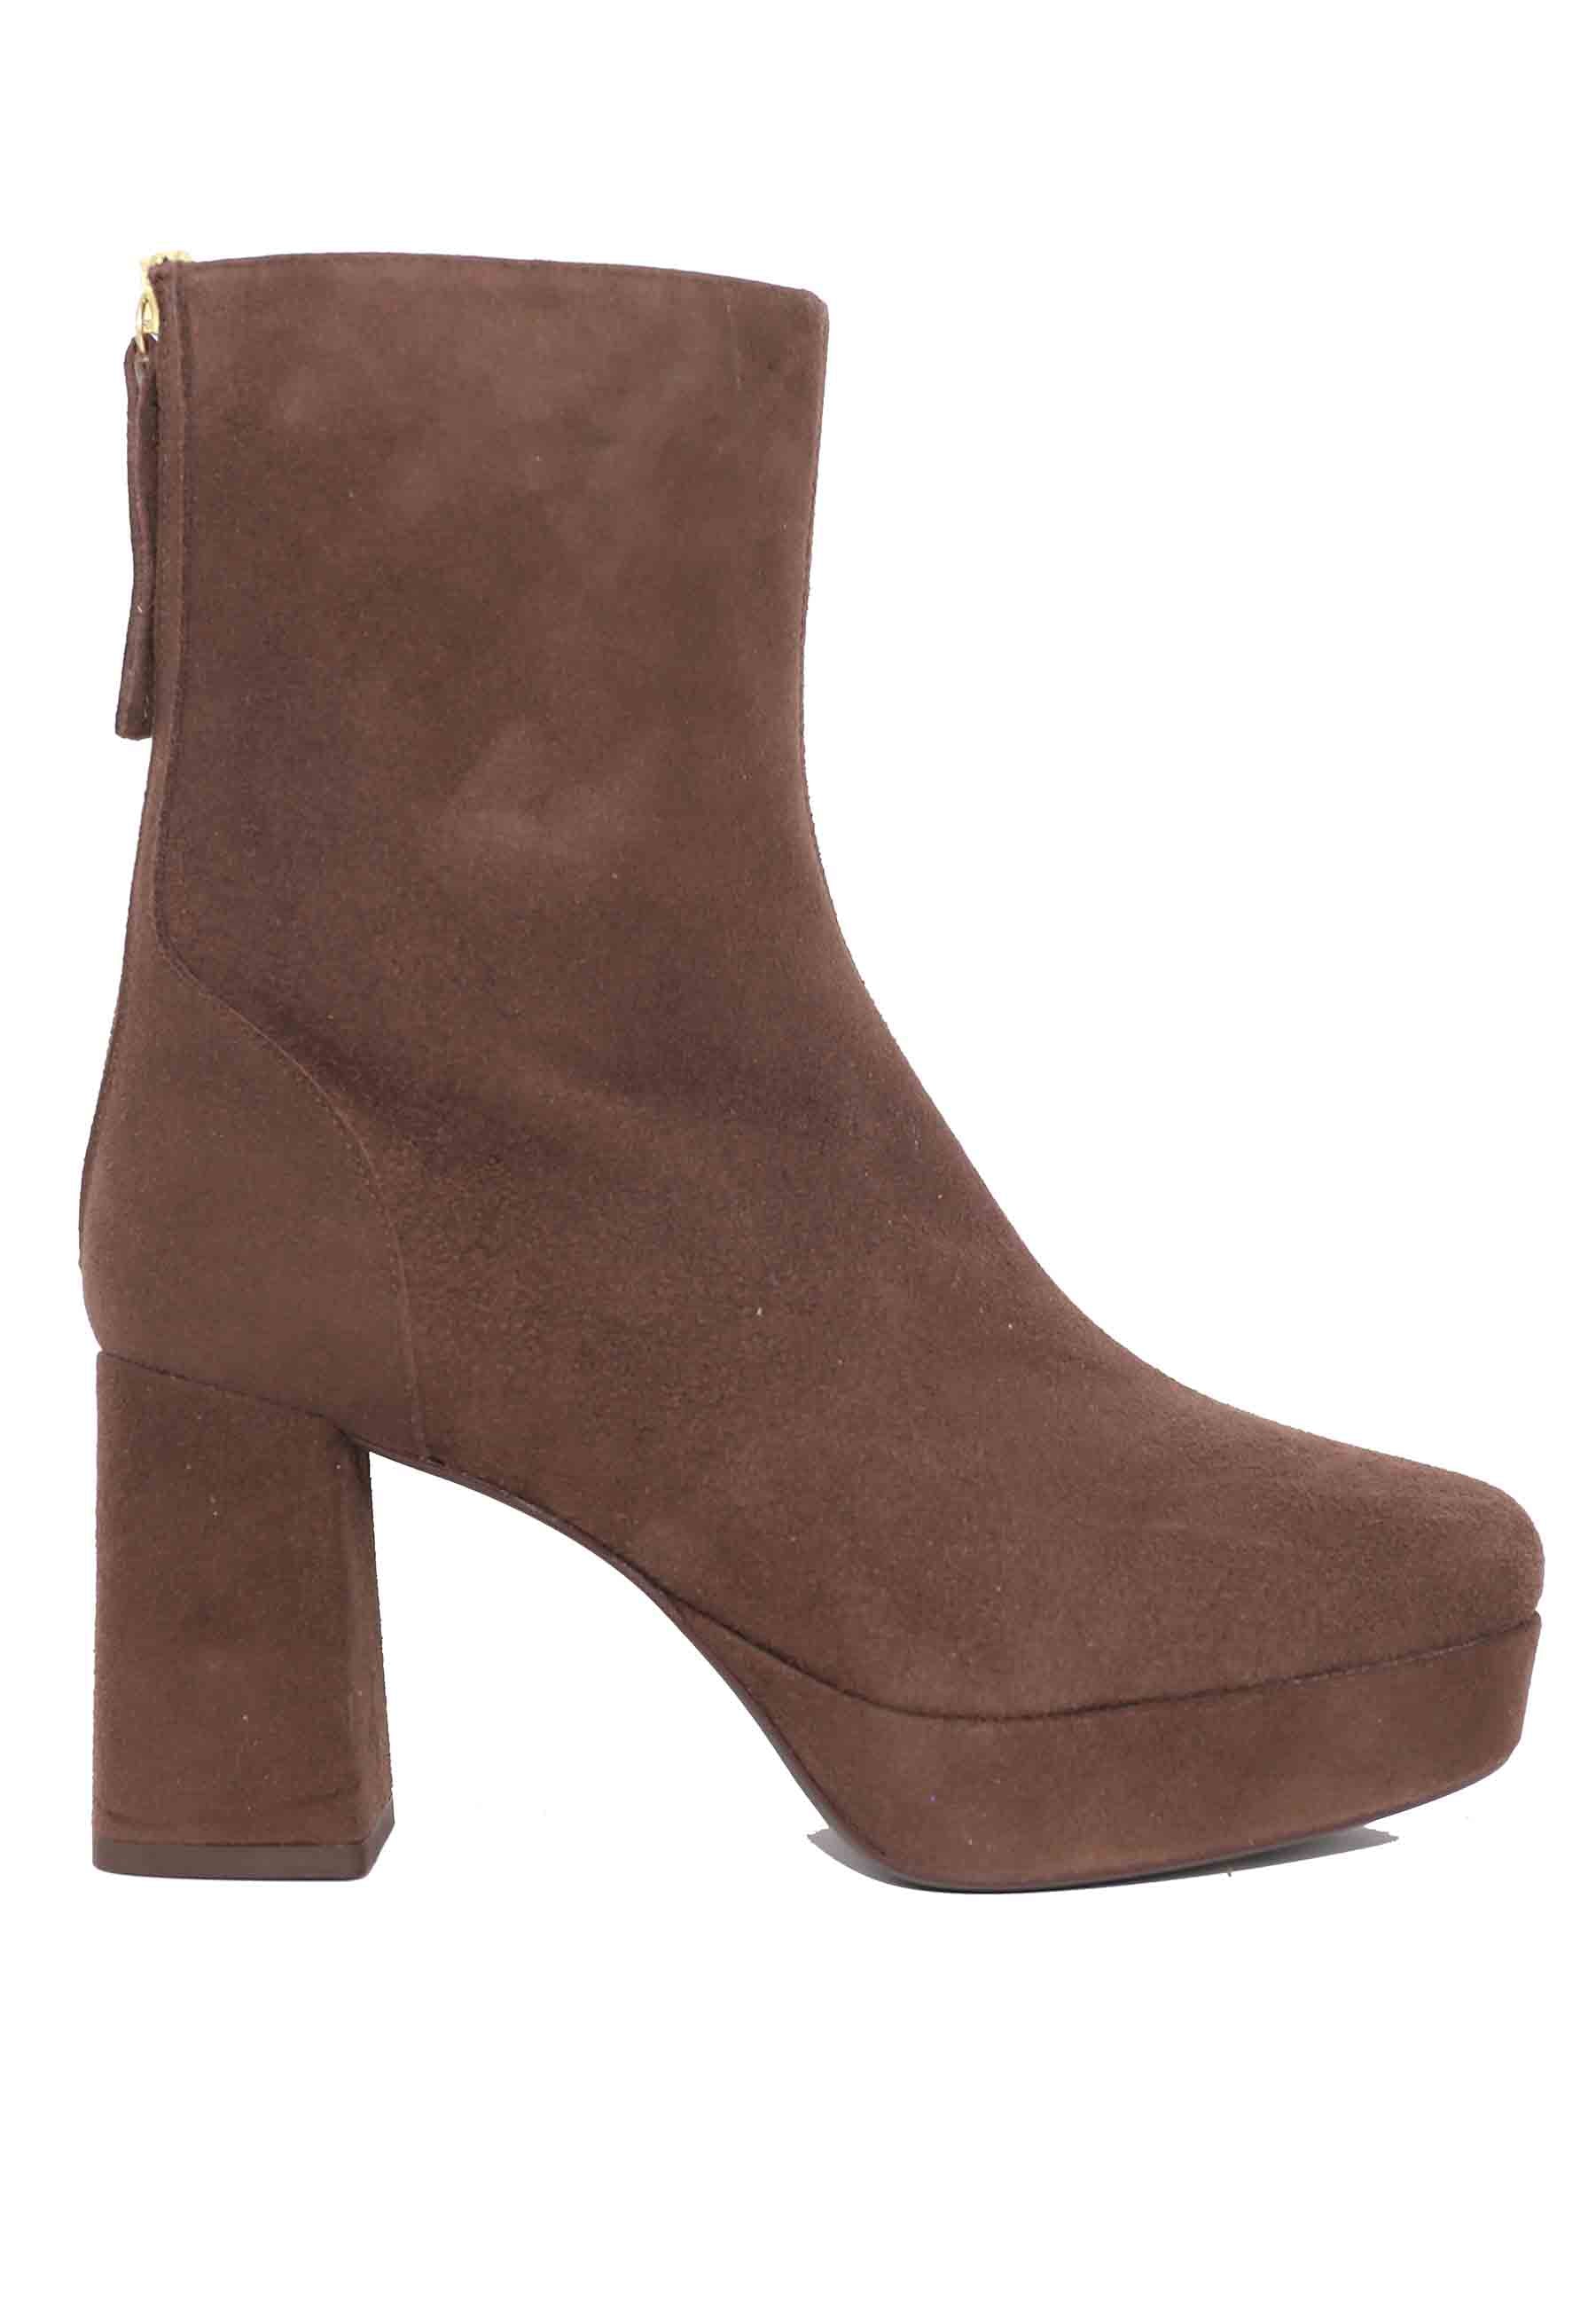 Women's ankle boots in dark brown suede with heel and plateau